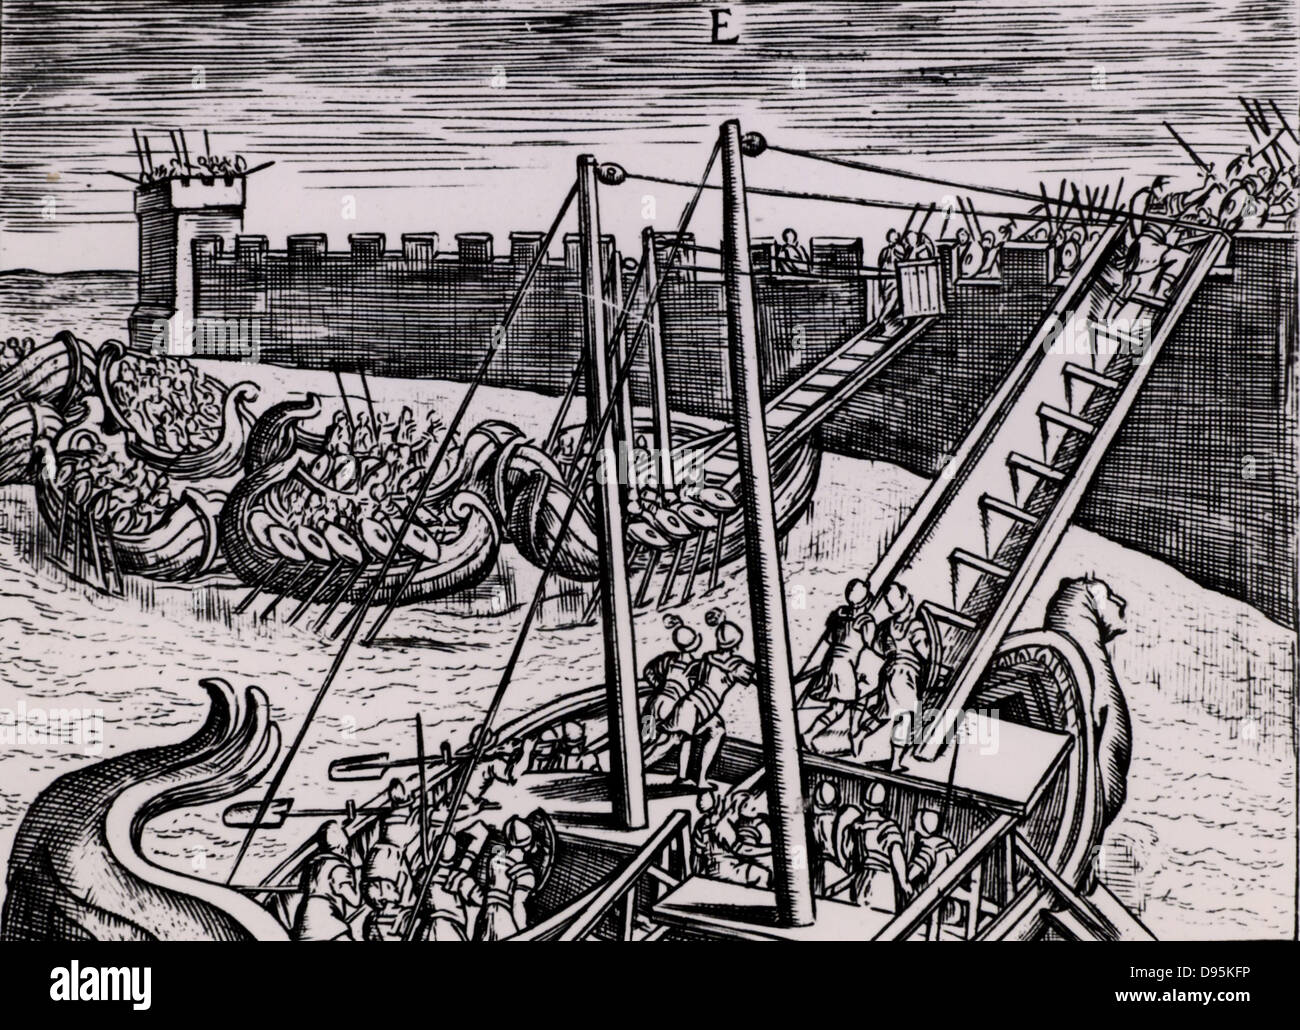 Roman soldiers scaling the walls of a fortress using ladders mounted on boats.   From 'Poliorceticon sive de machinis tormentis telis' by Justus Lipsius (Joost Lips) (Antwerp, 1605). Engraving. Stock Photo